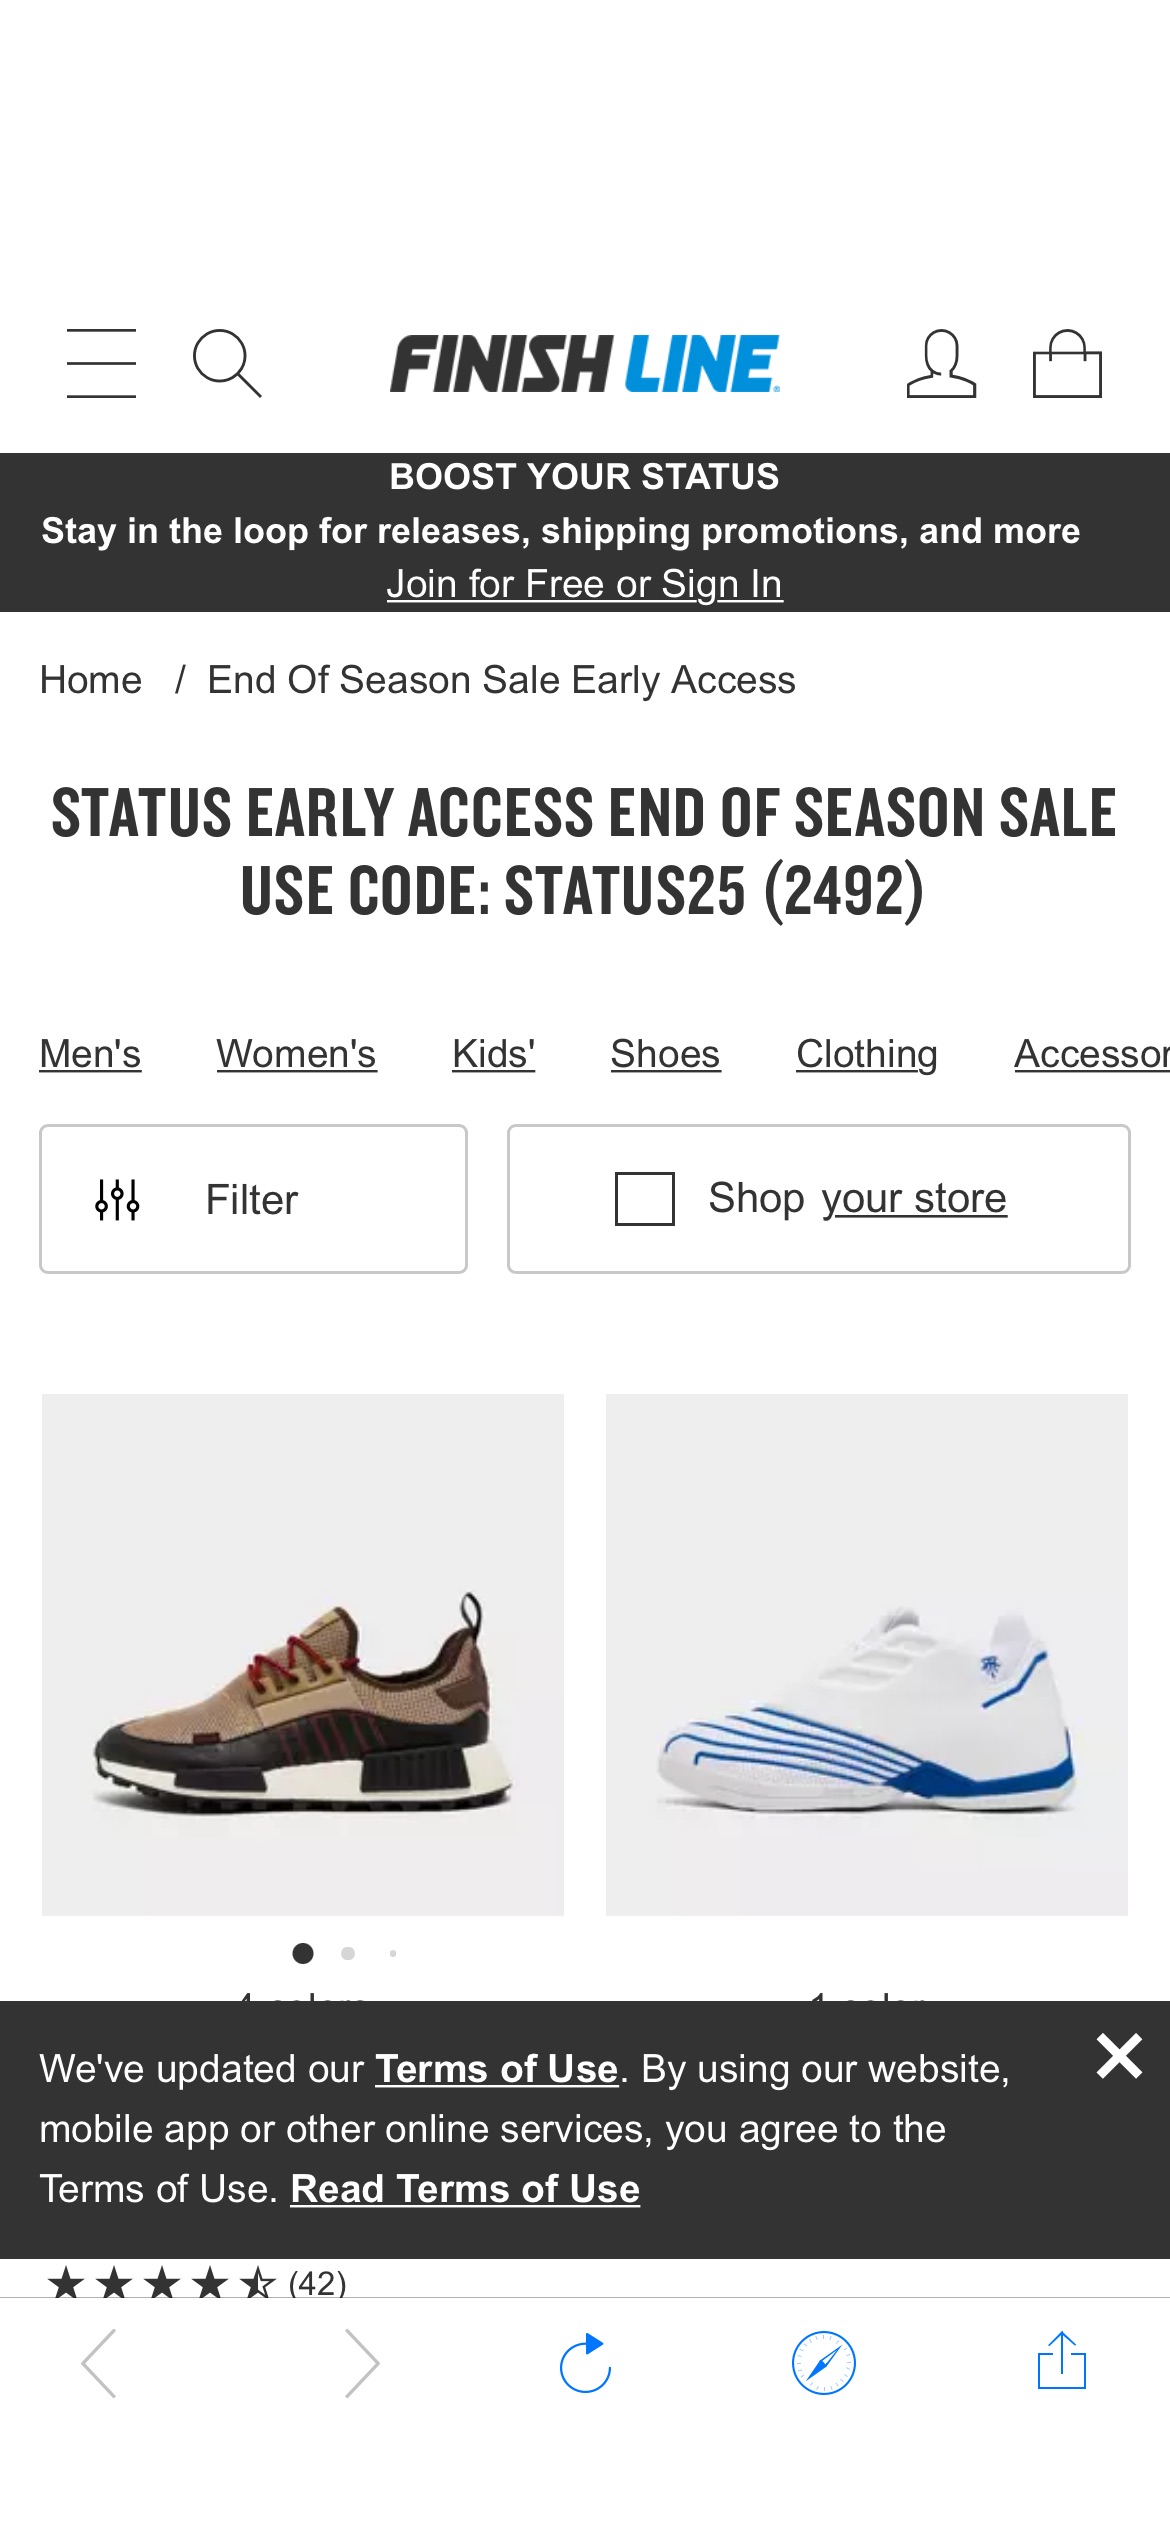 End of Season Sale Early Access FINISH LINE